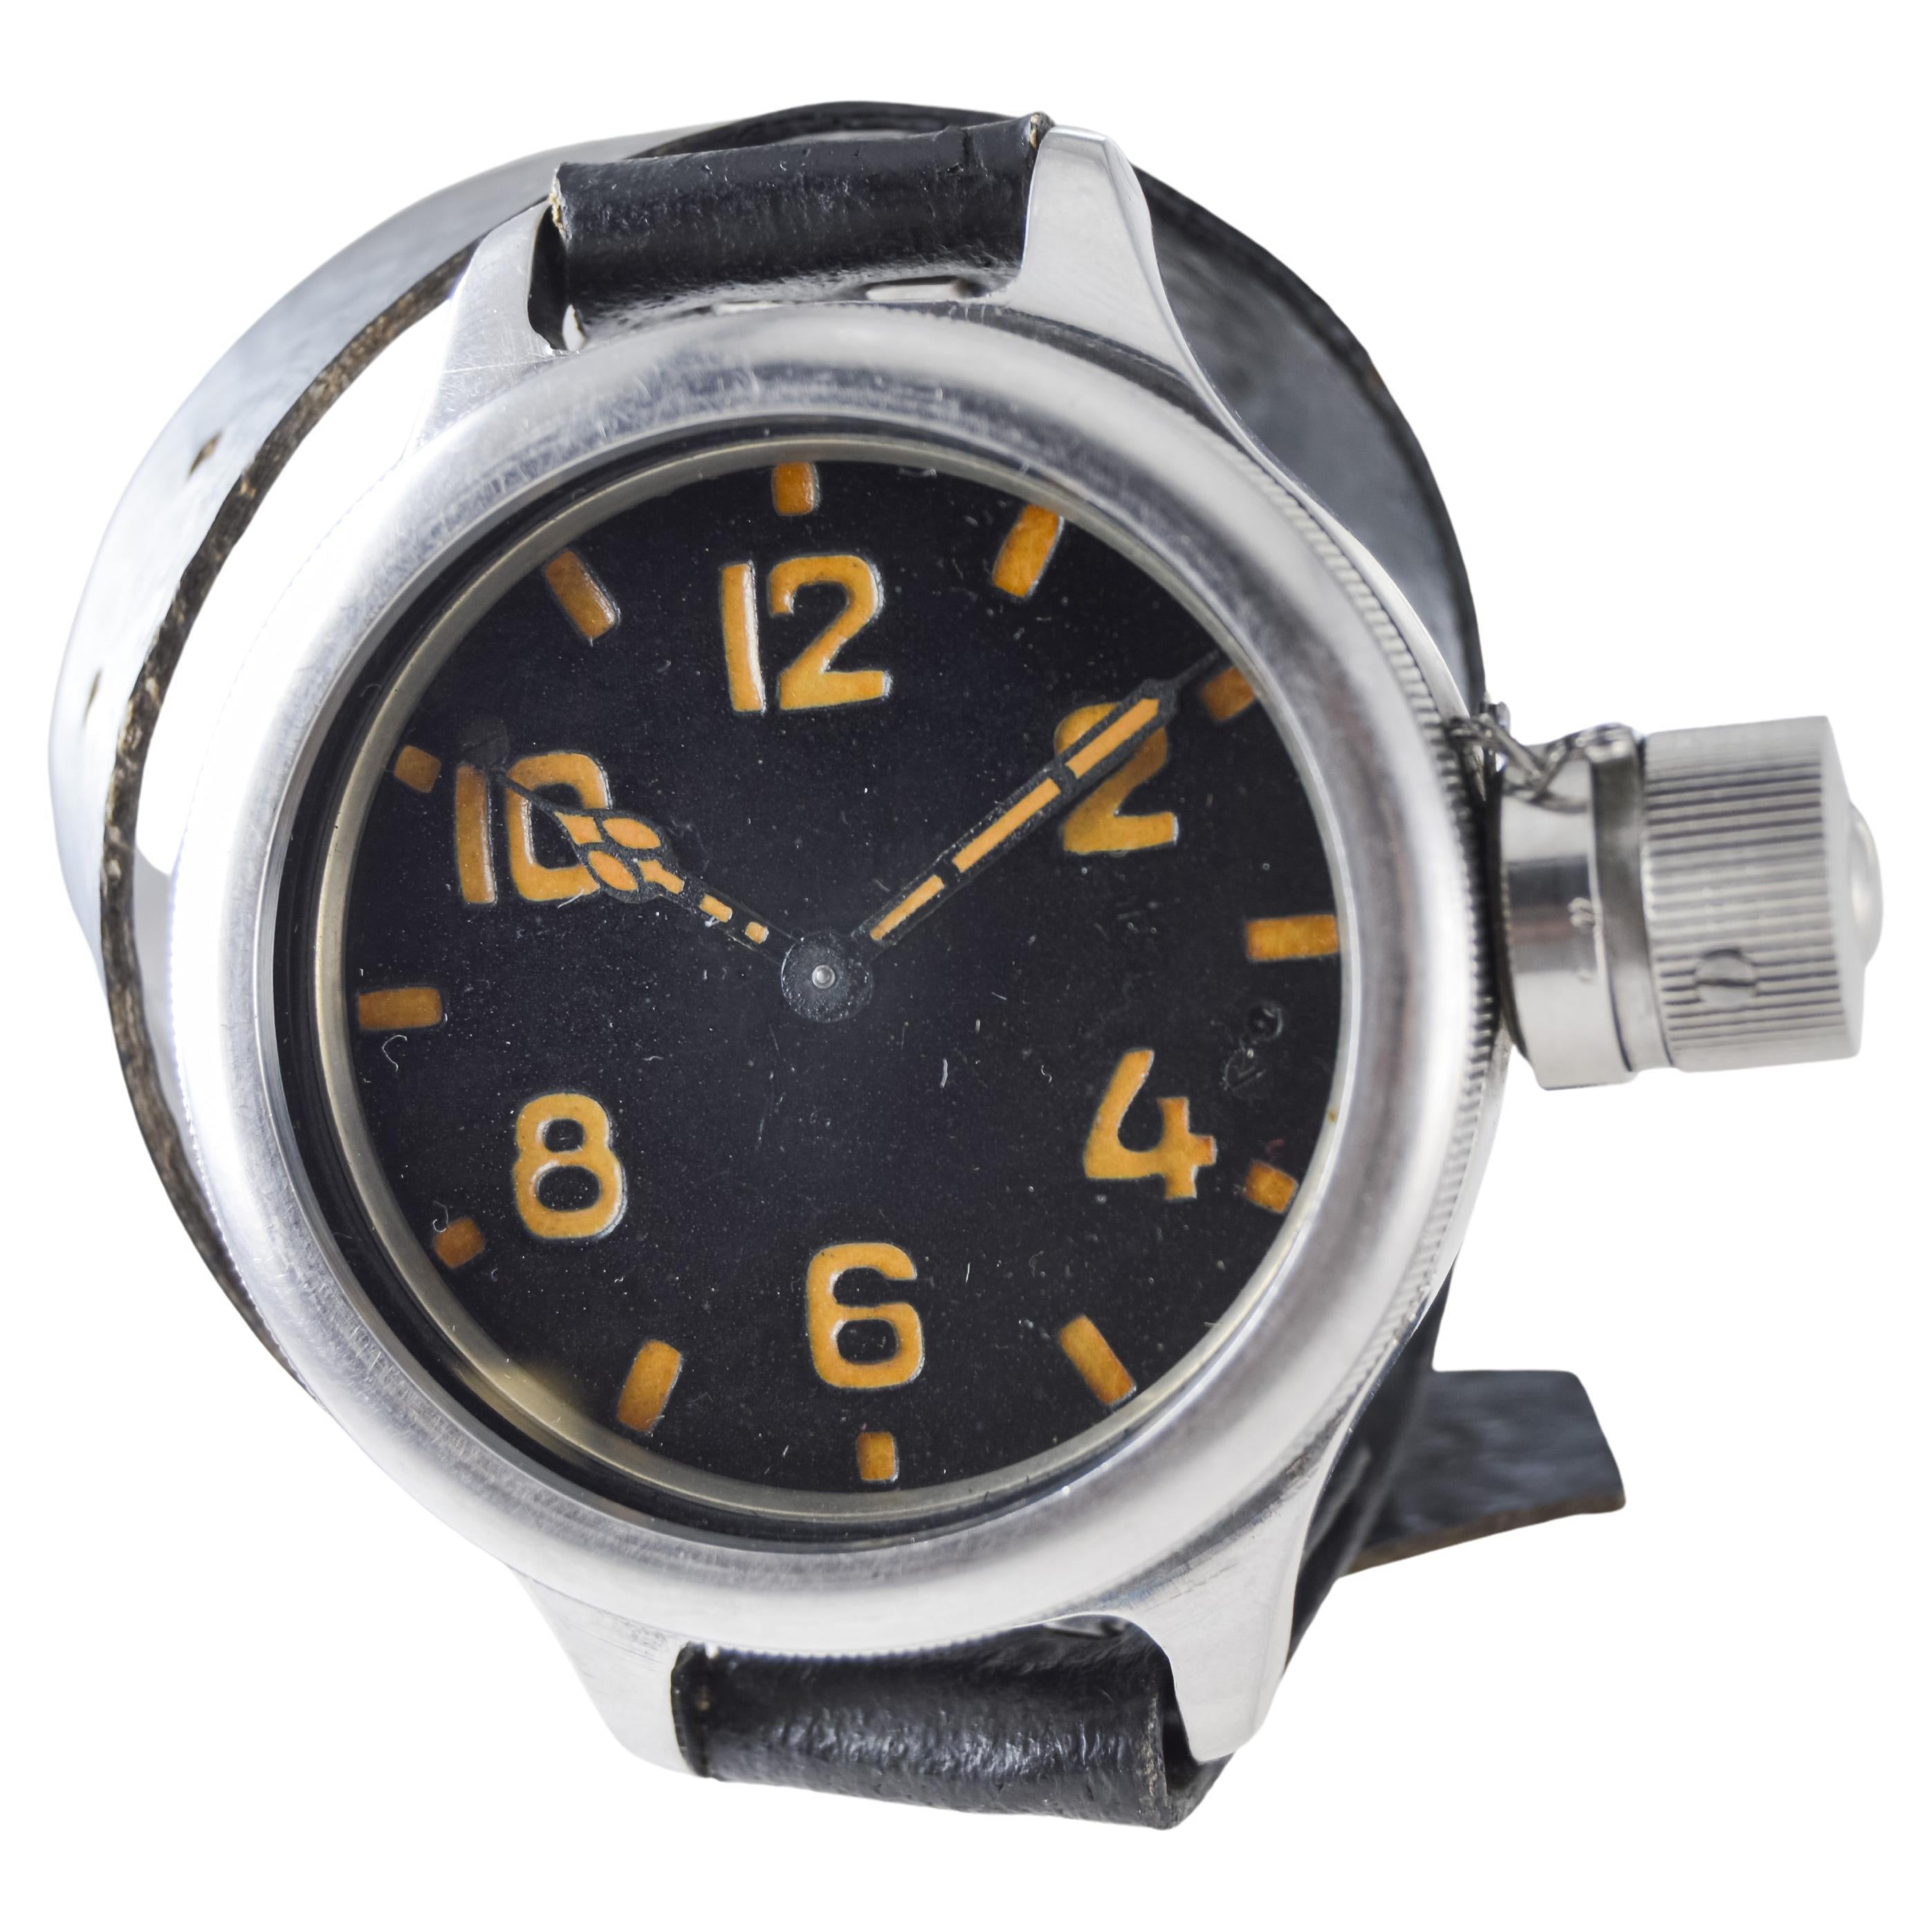 Modernist Russian Submariners Watch All Original from 1940s / 50s Steel For Sale